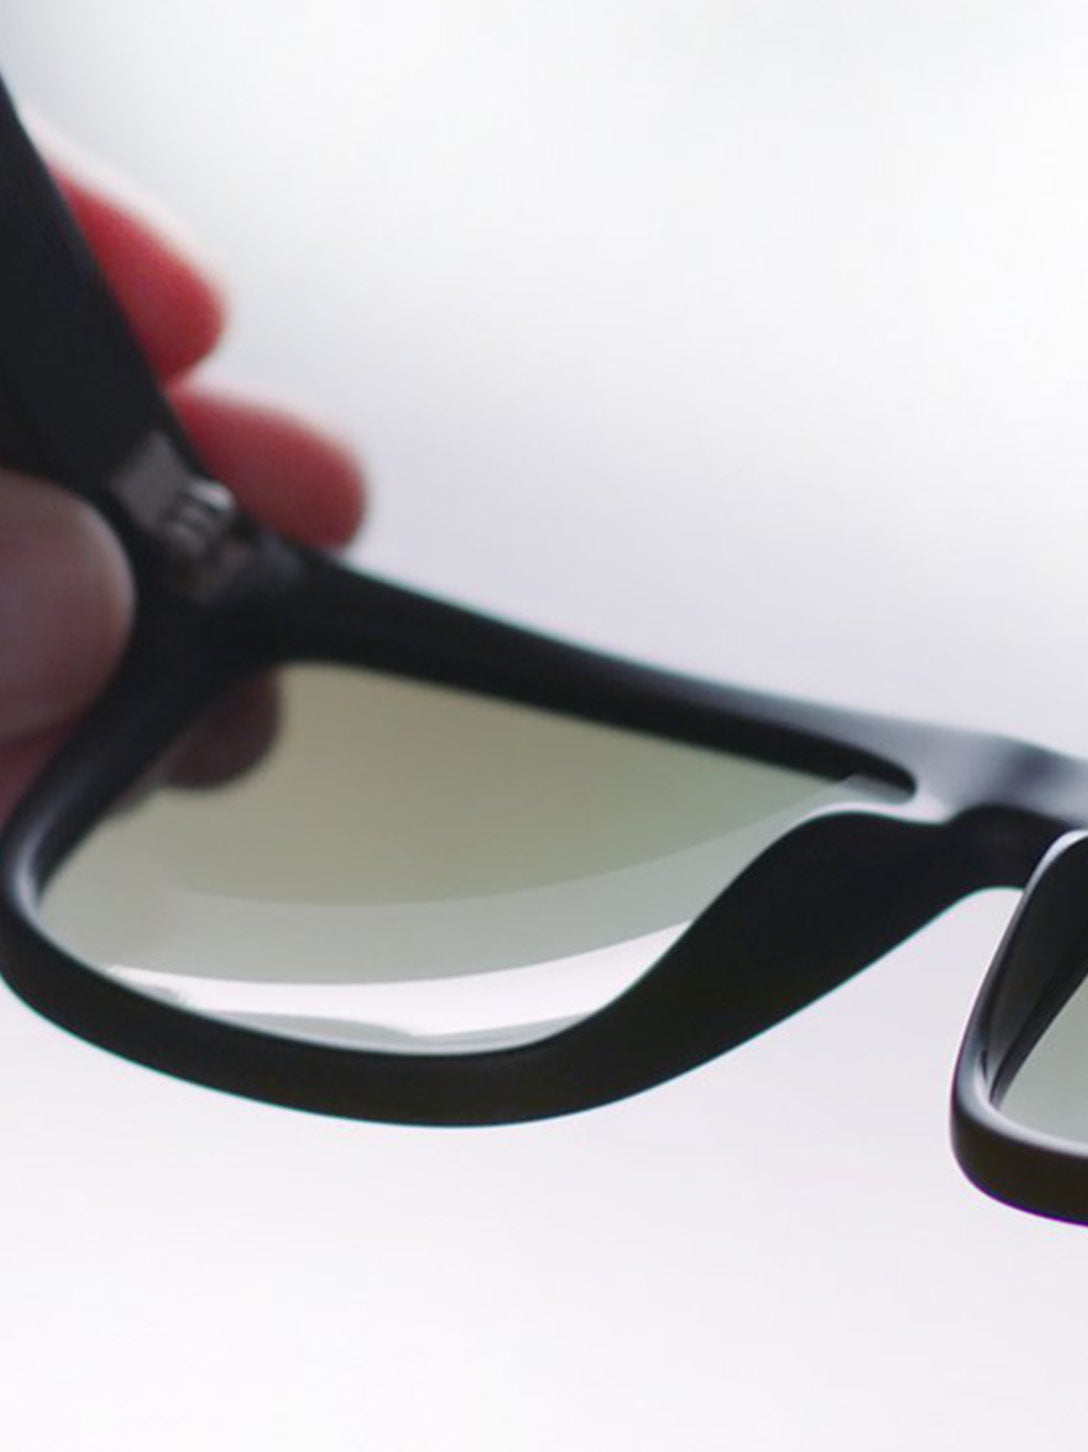 Lenses being inspected for quality in the frame